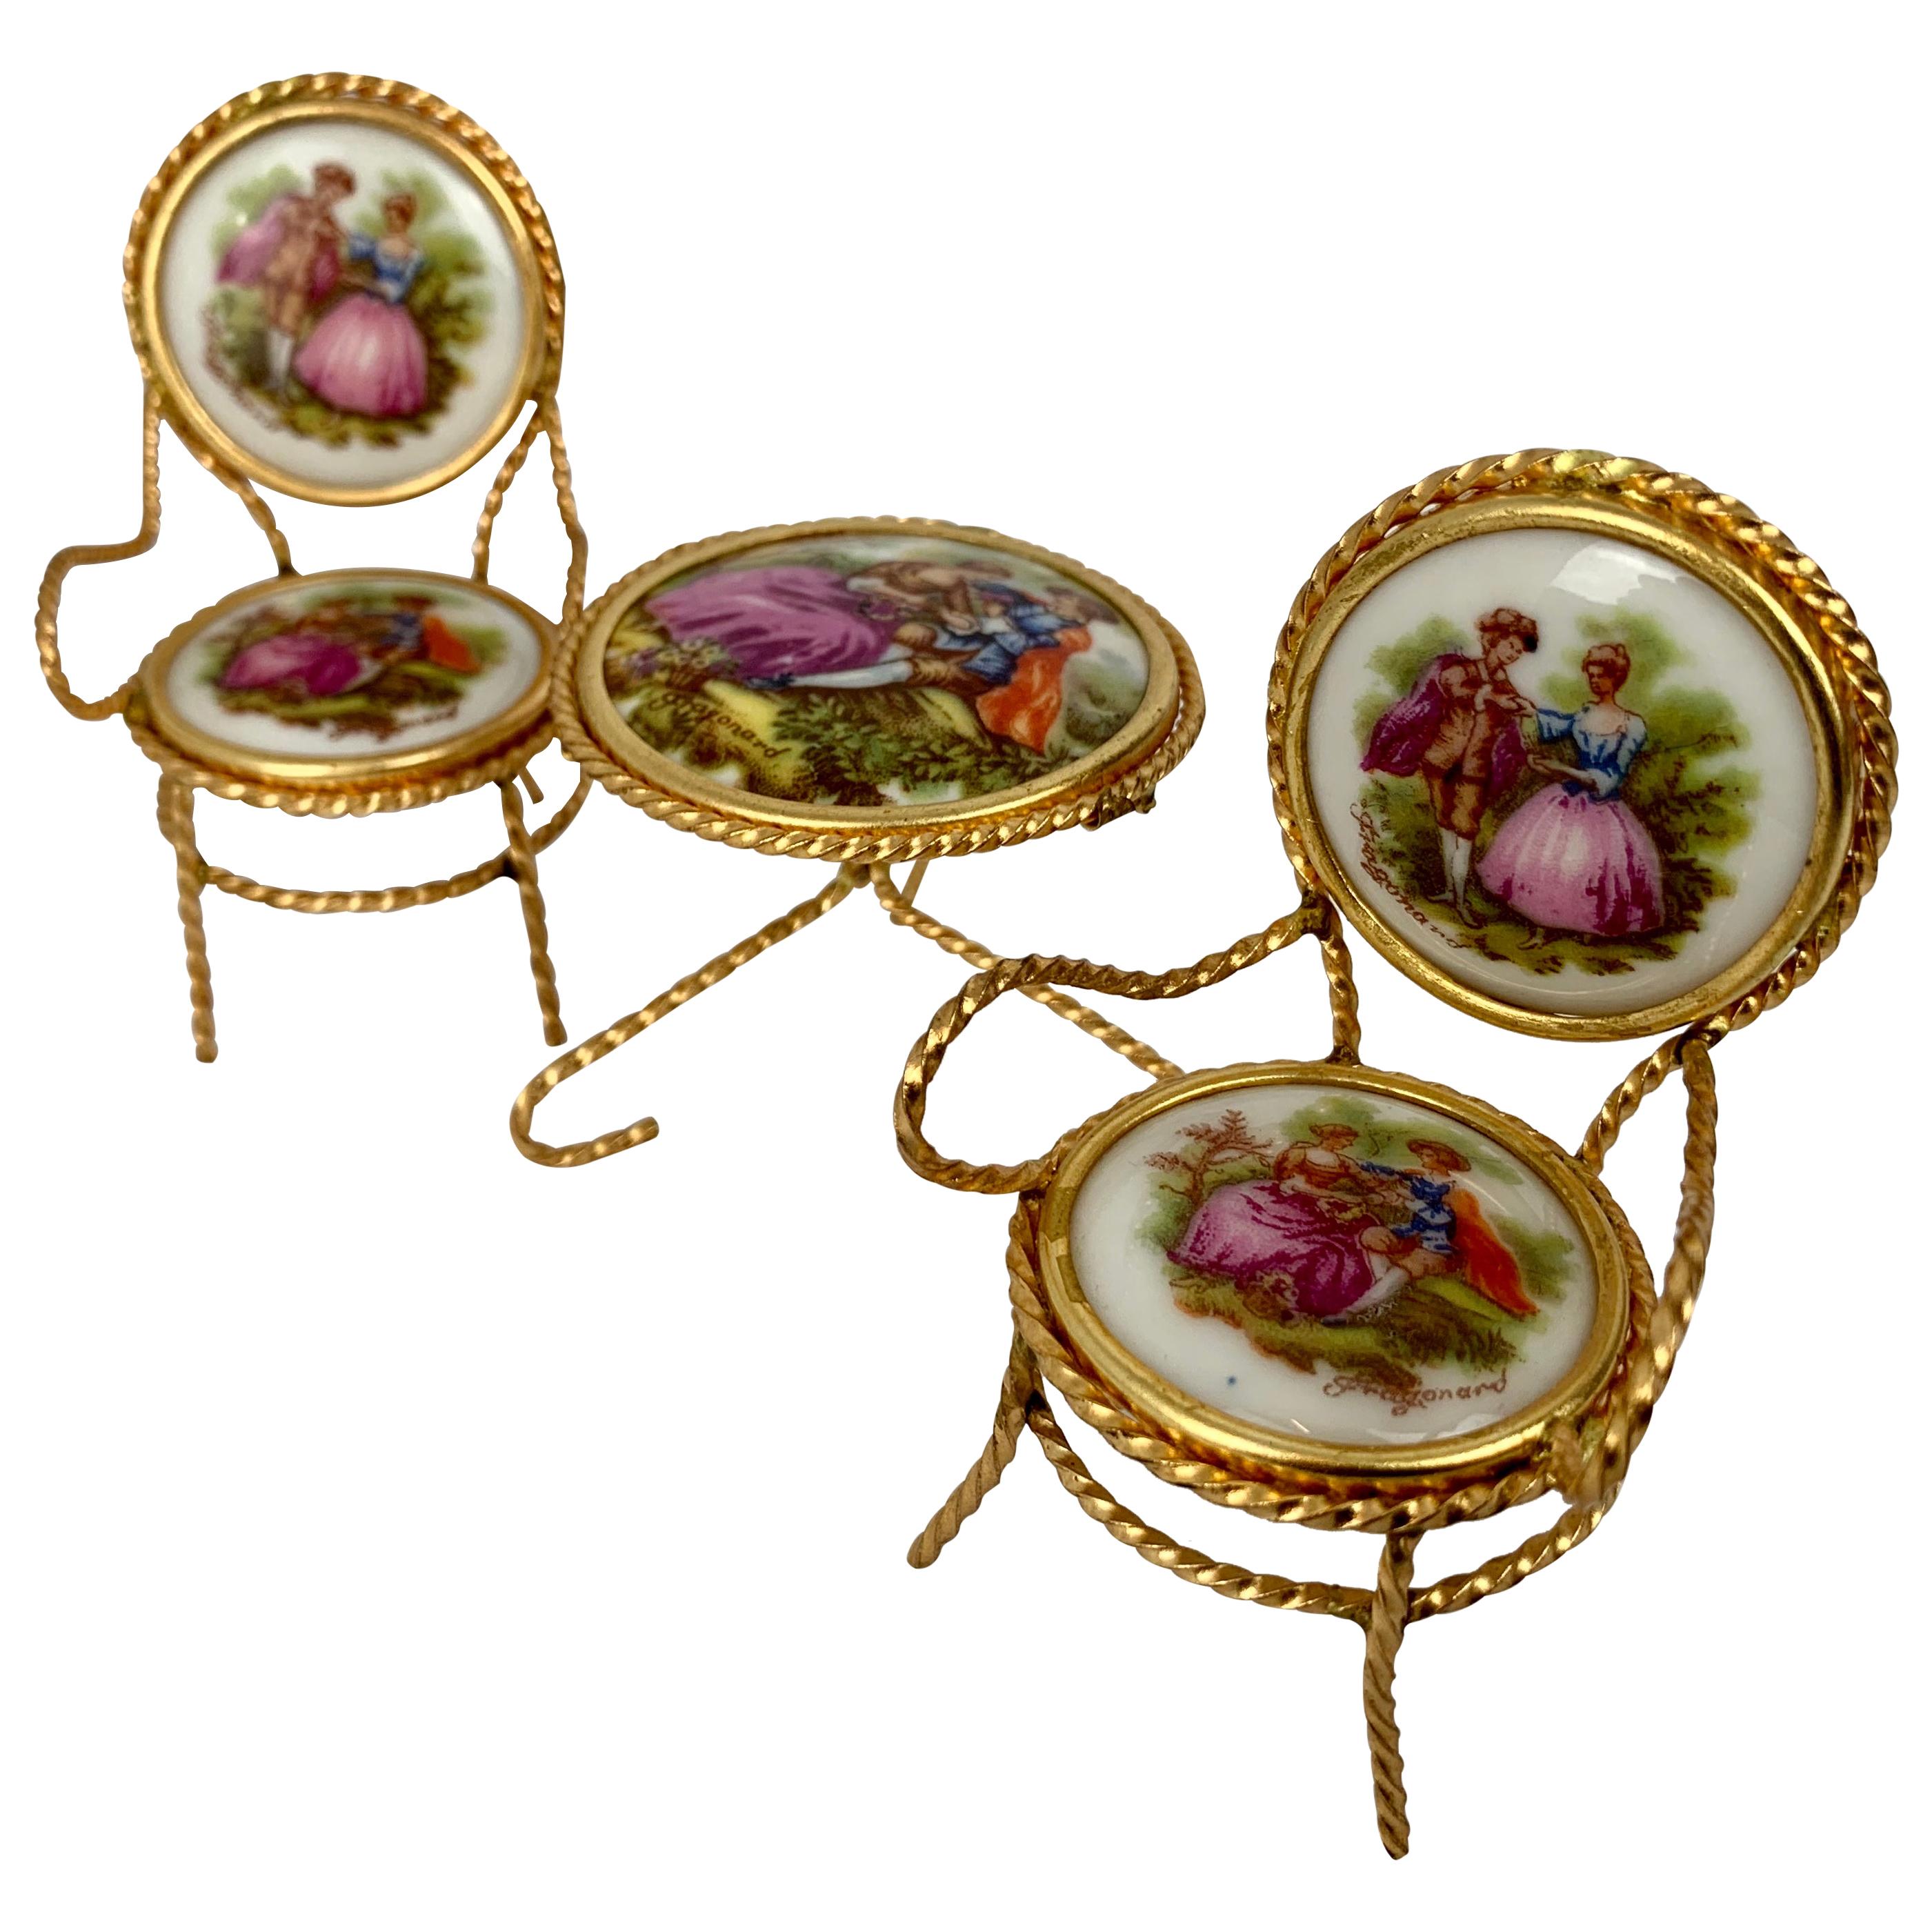 Three Piece Miniature Furniture Suite with Limoges Porcelain Plaques & Gilt Wire